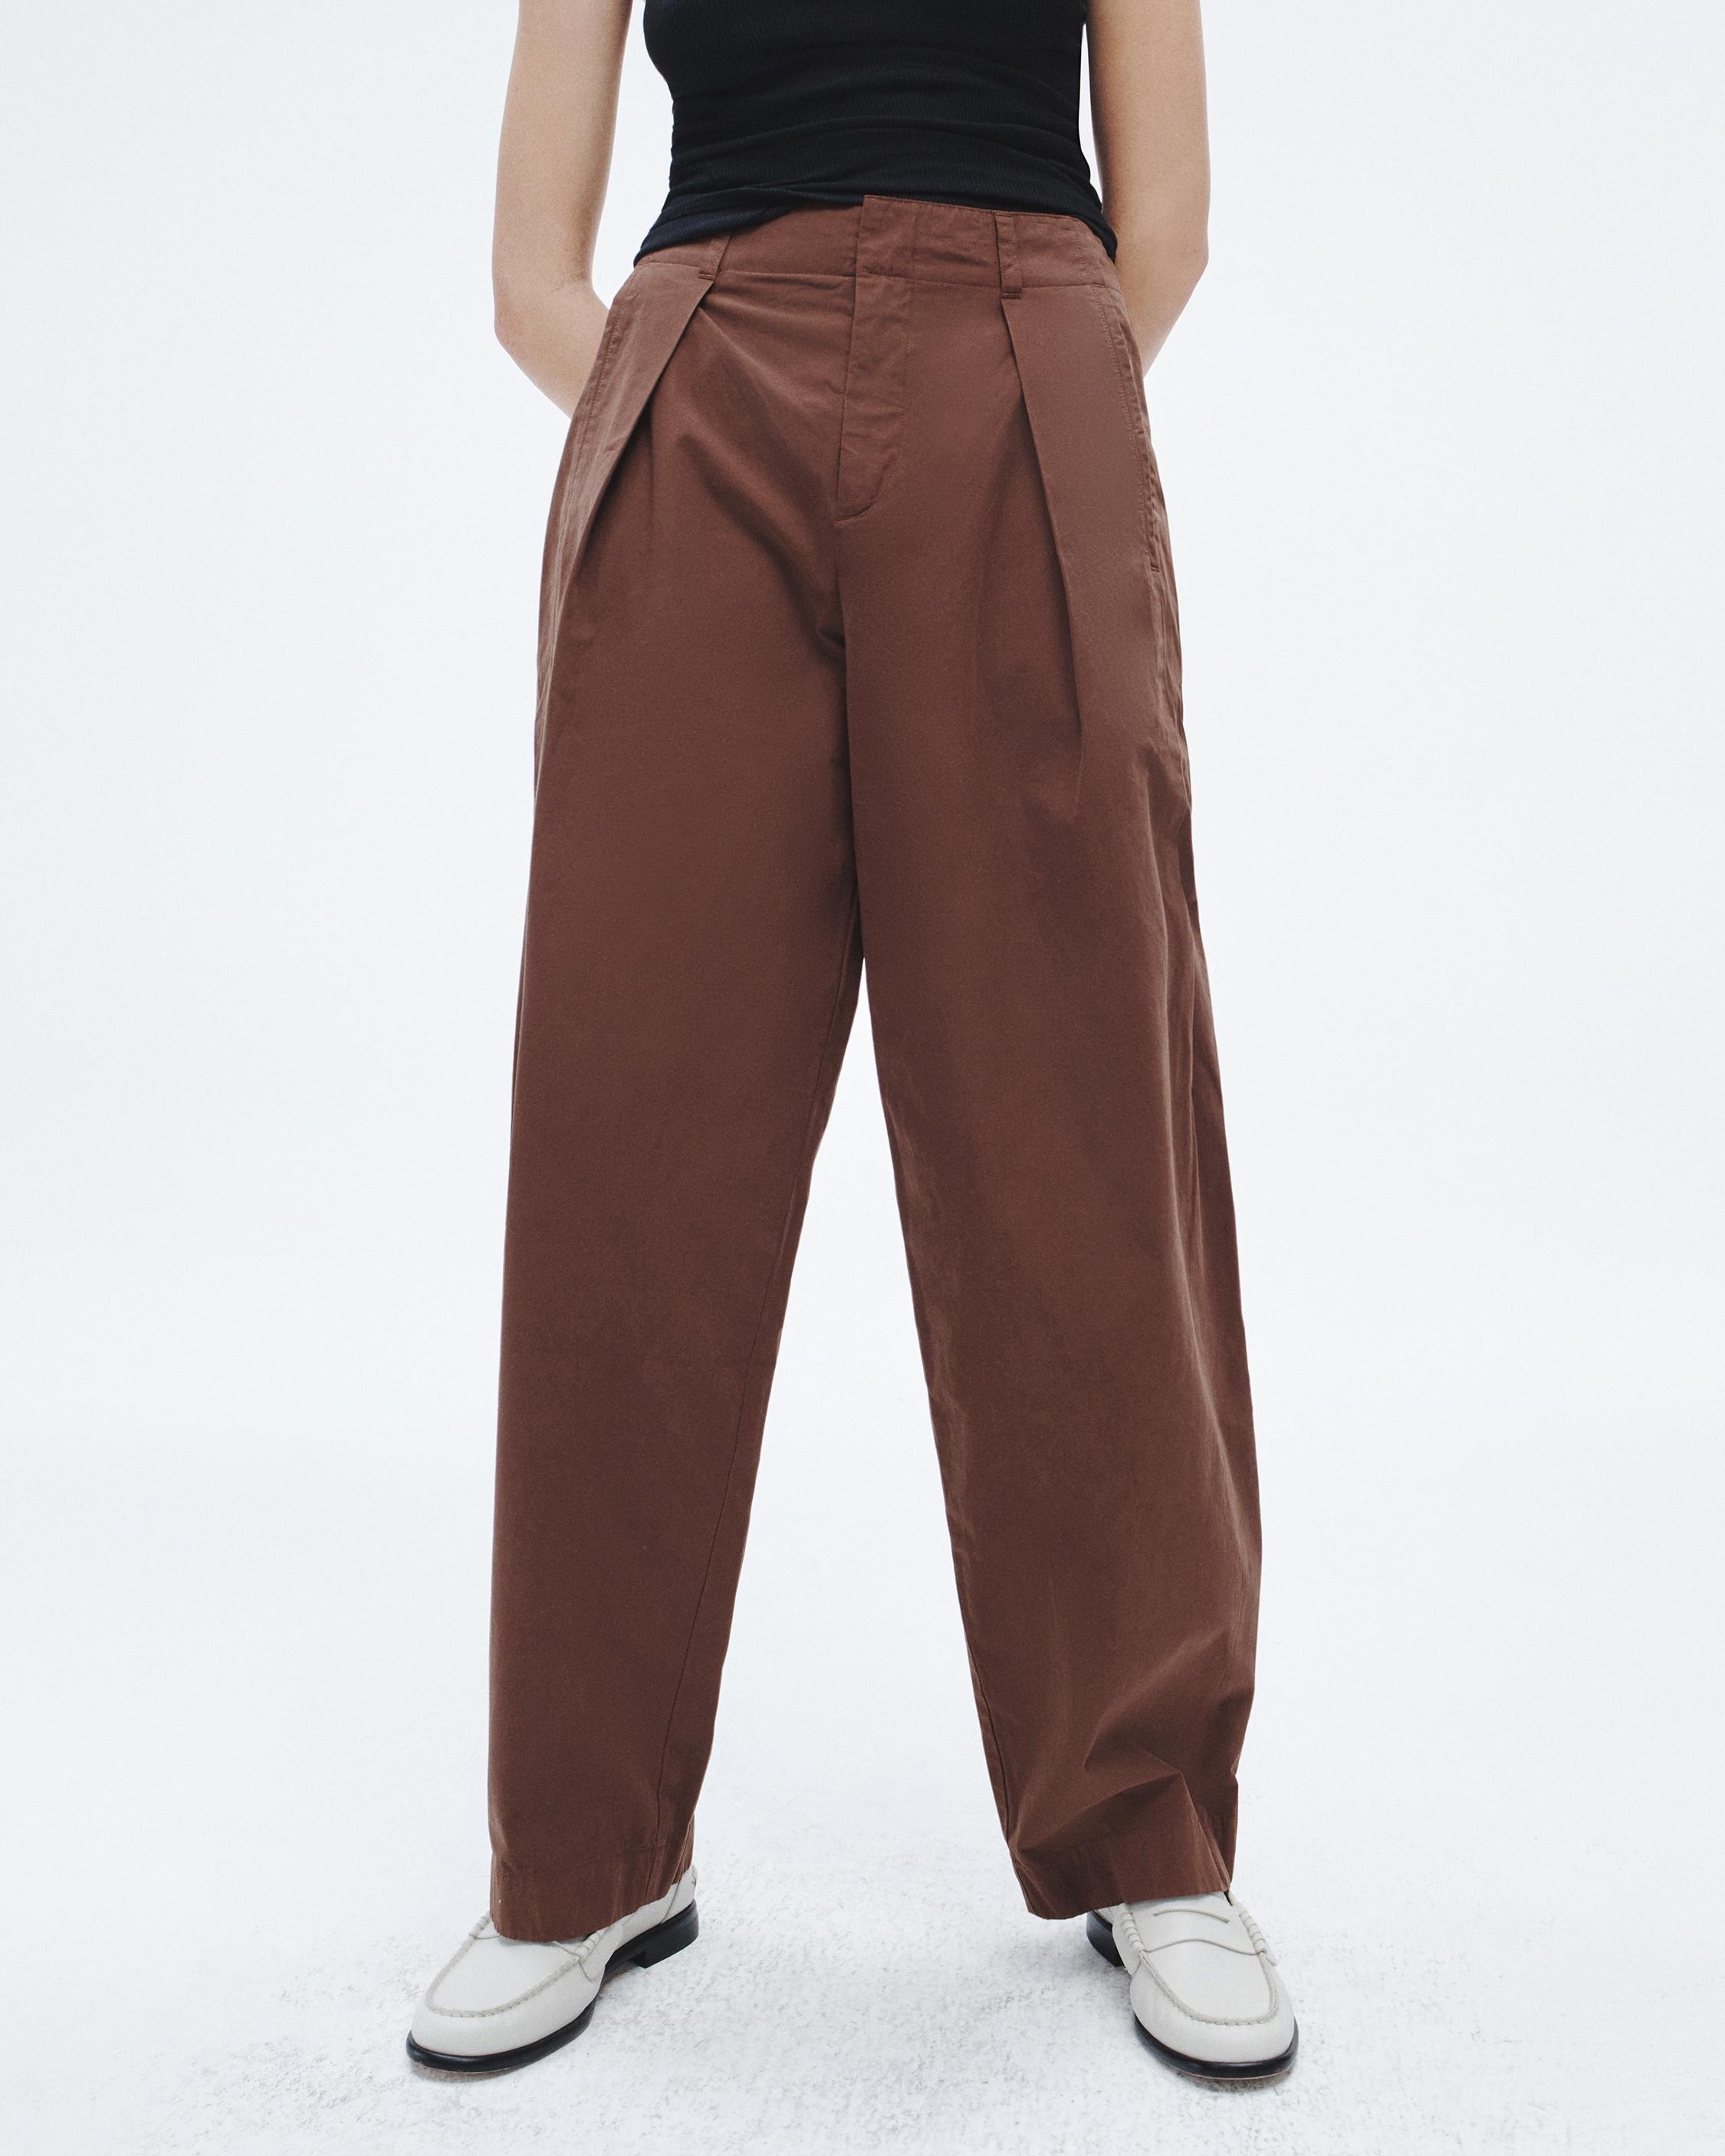 Donovan Cotton Pant
Relaxed Fit - 5